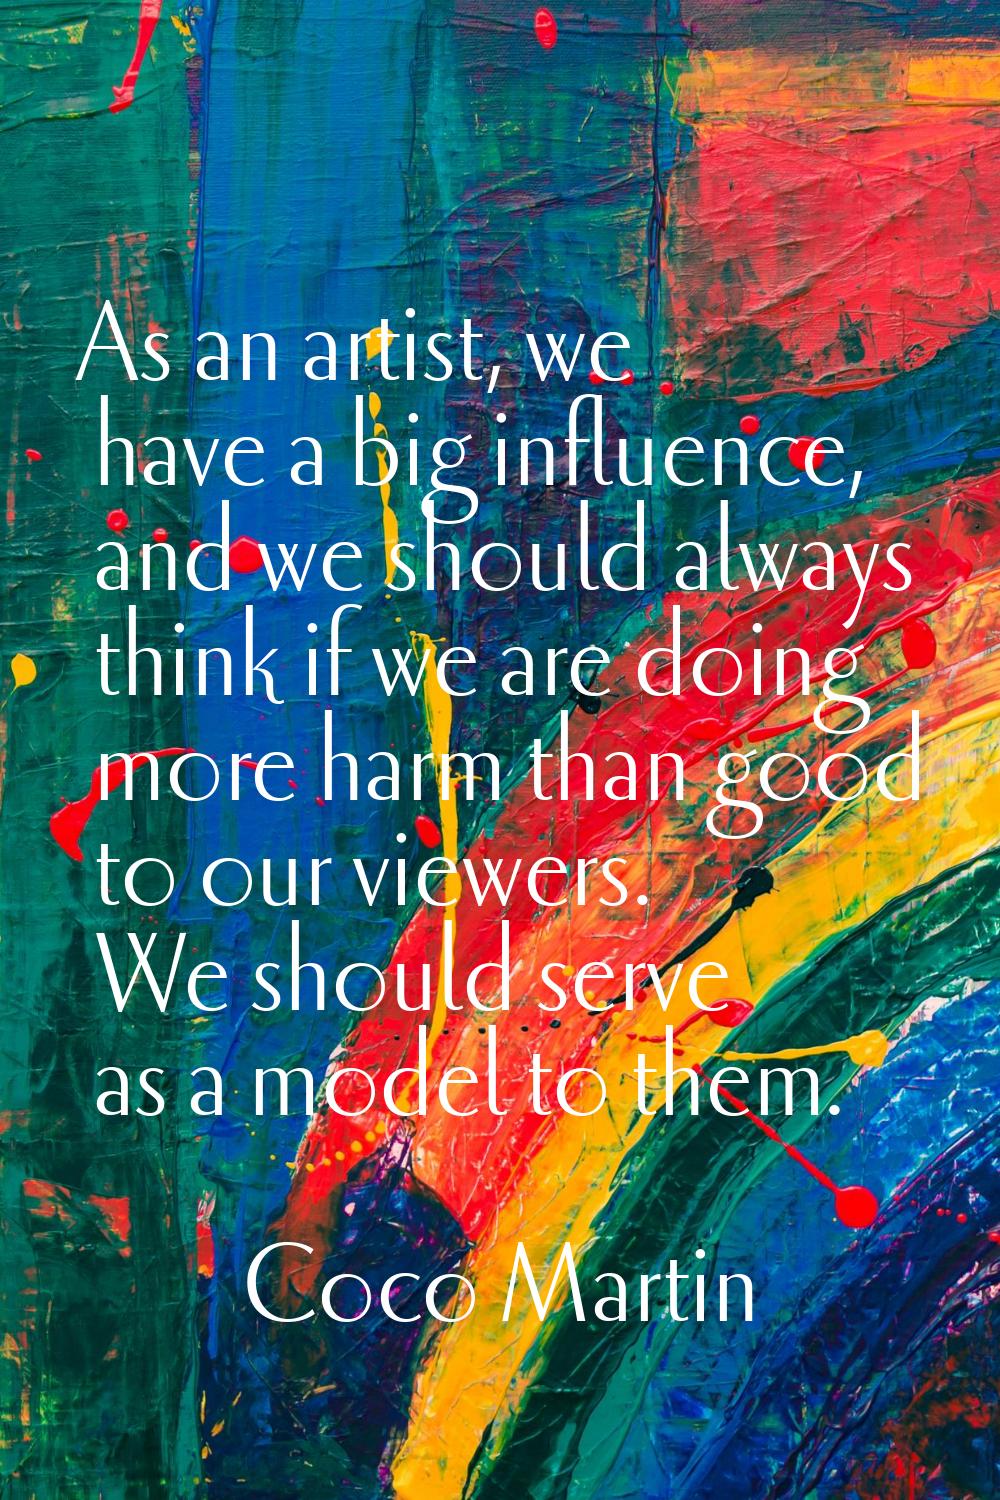 As an artist, we have a big influence, and we should always think if we are doing more harm than go